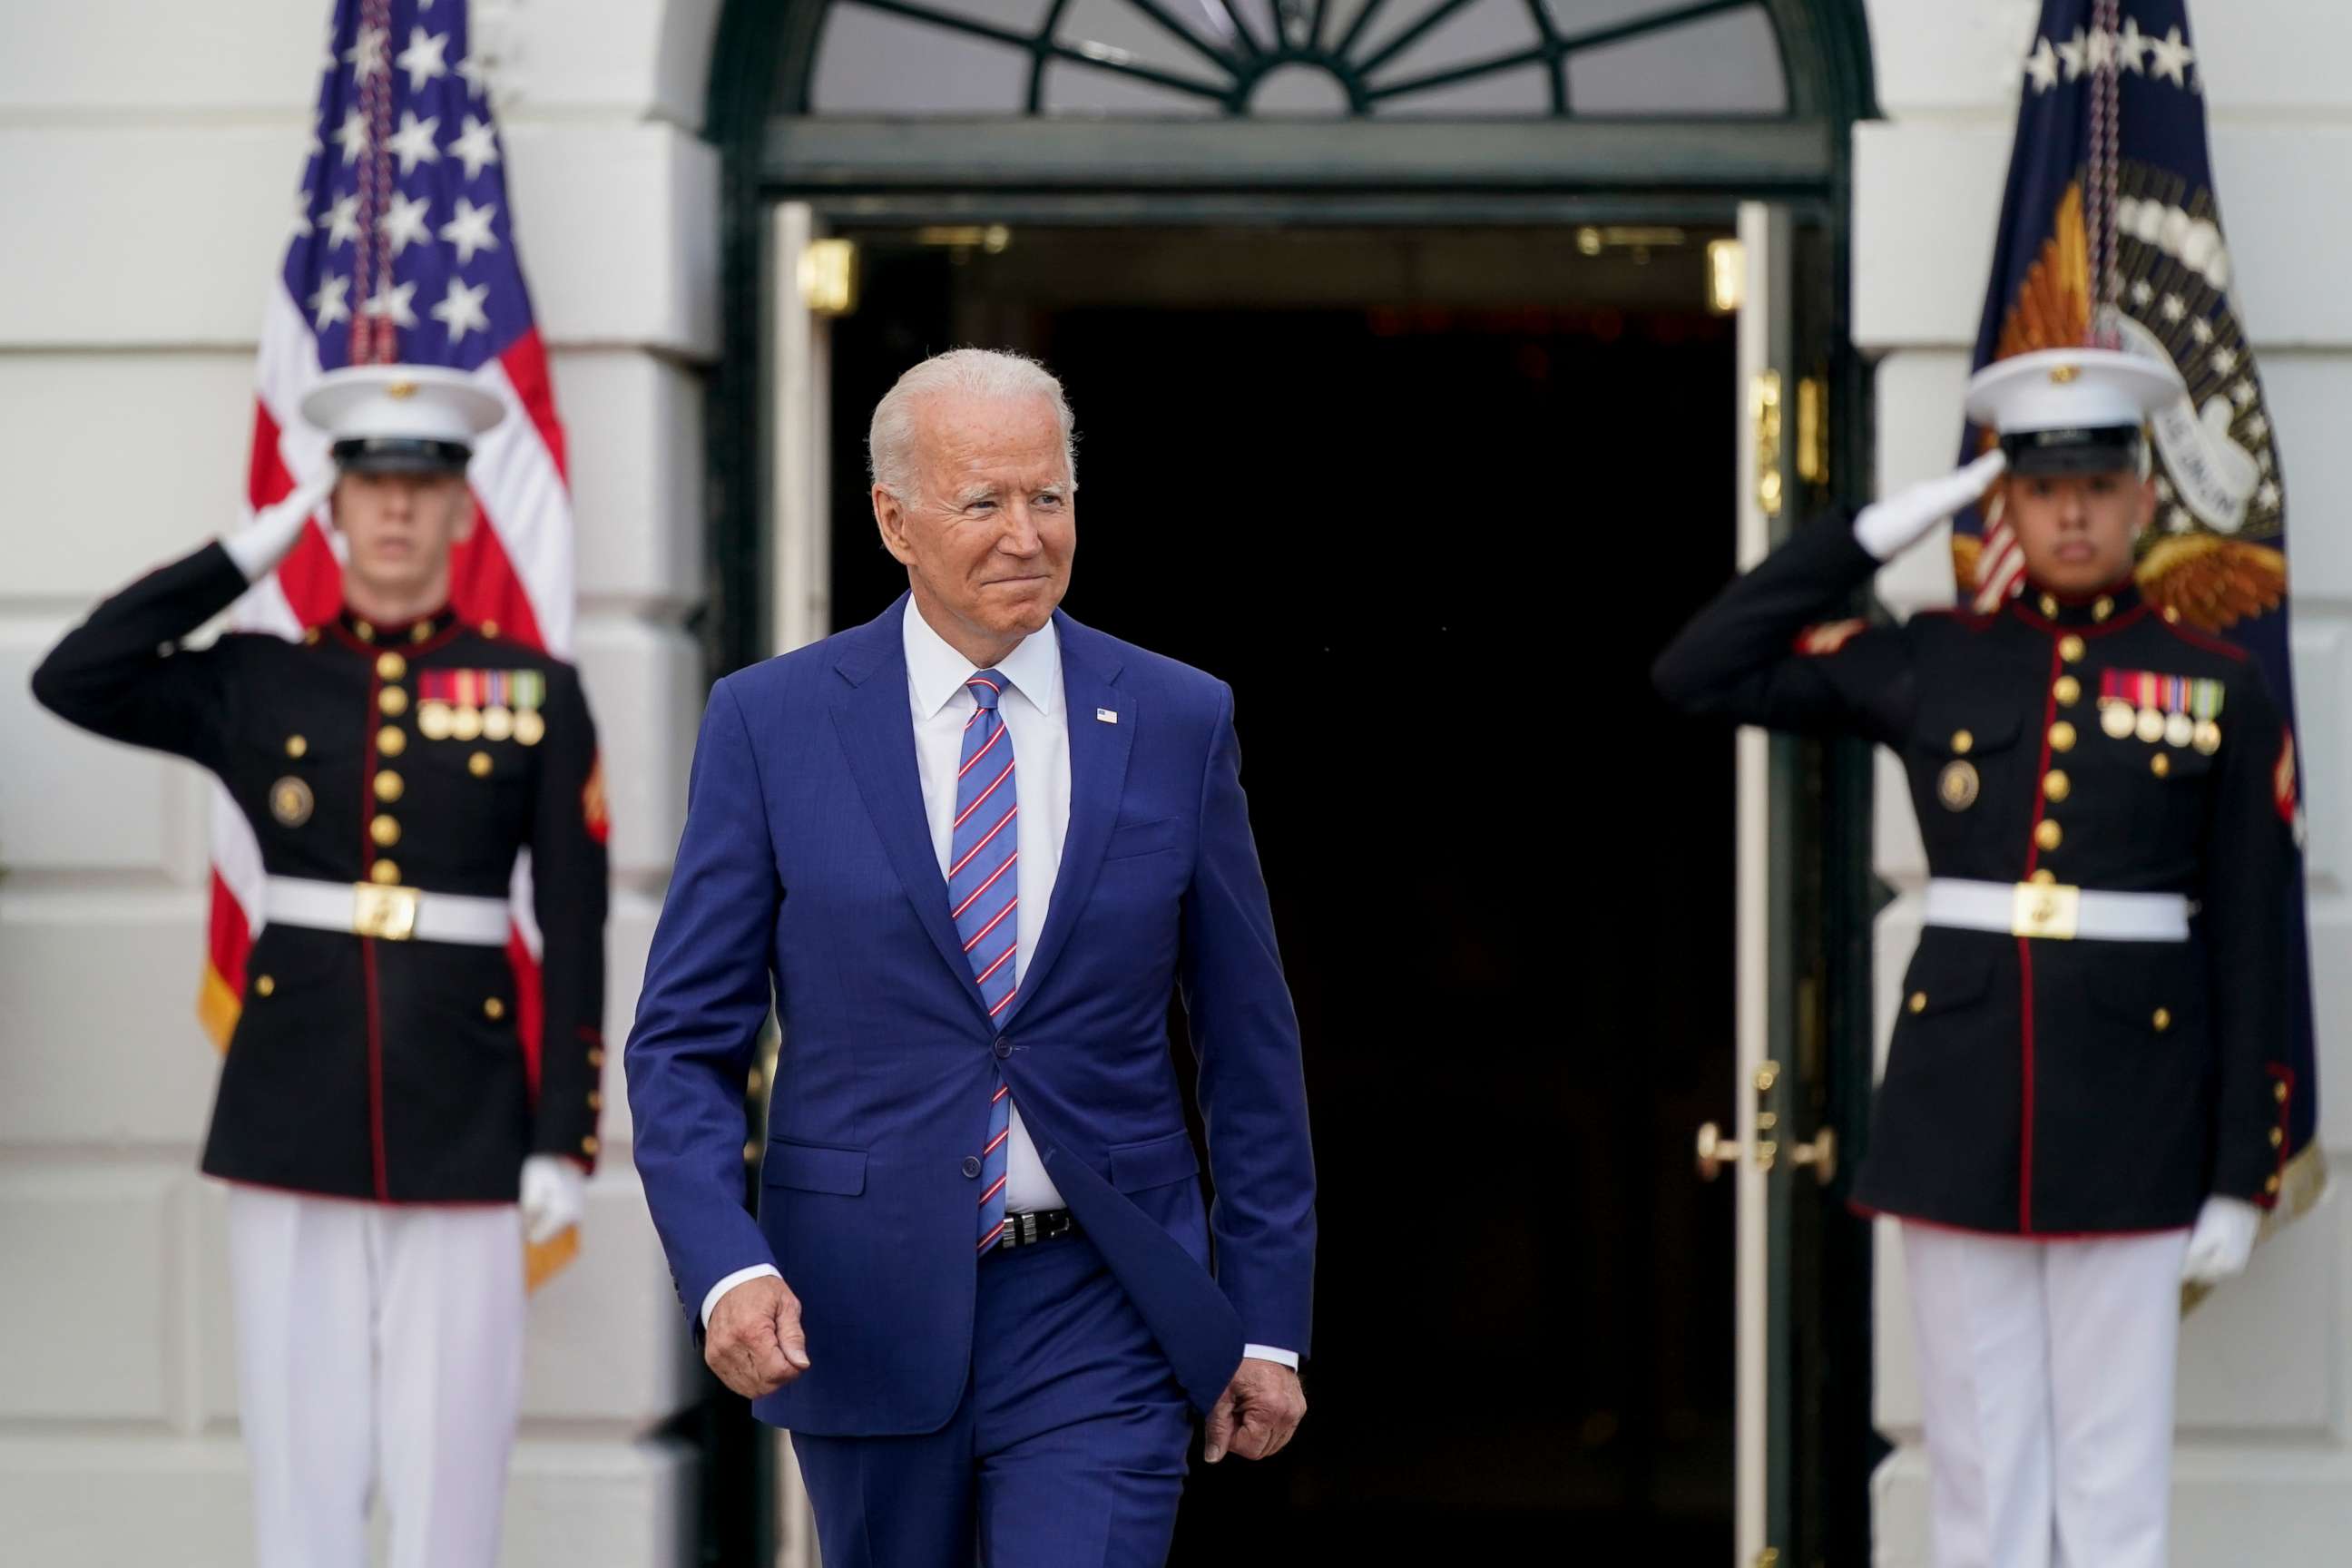 PHOTO: President Joe Biden arrives to speak during an Independence Day celebration on the South Lawn of the White House on July 4, 2021.